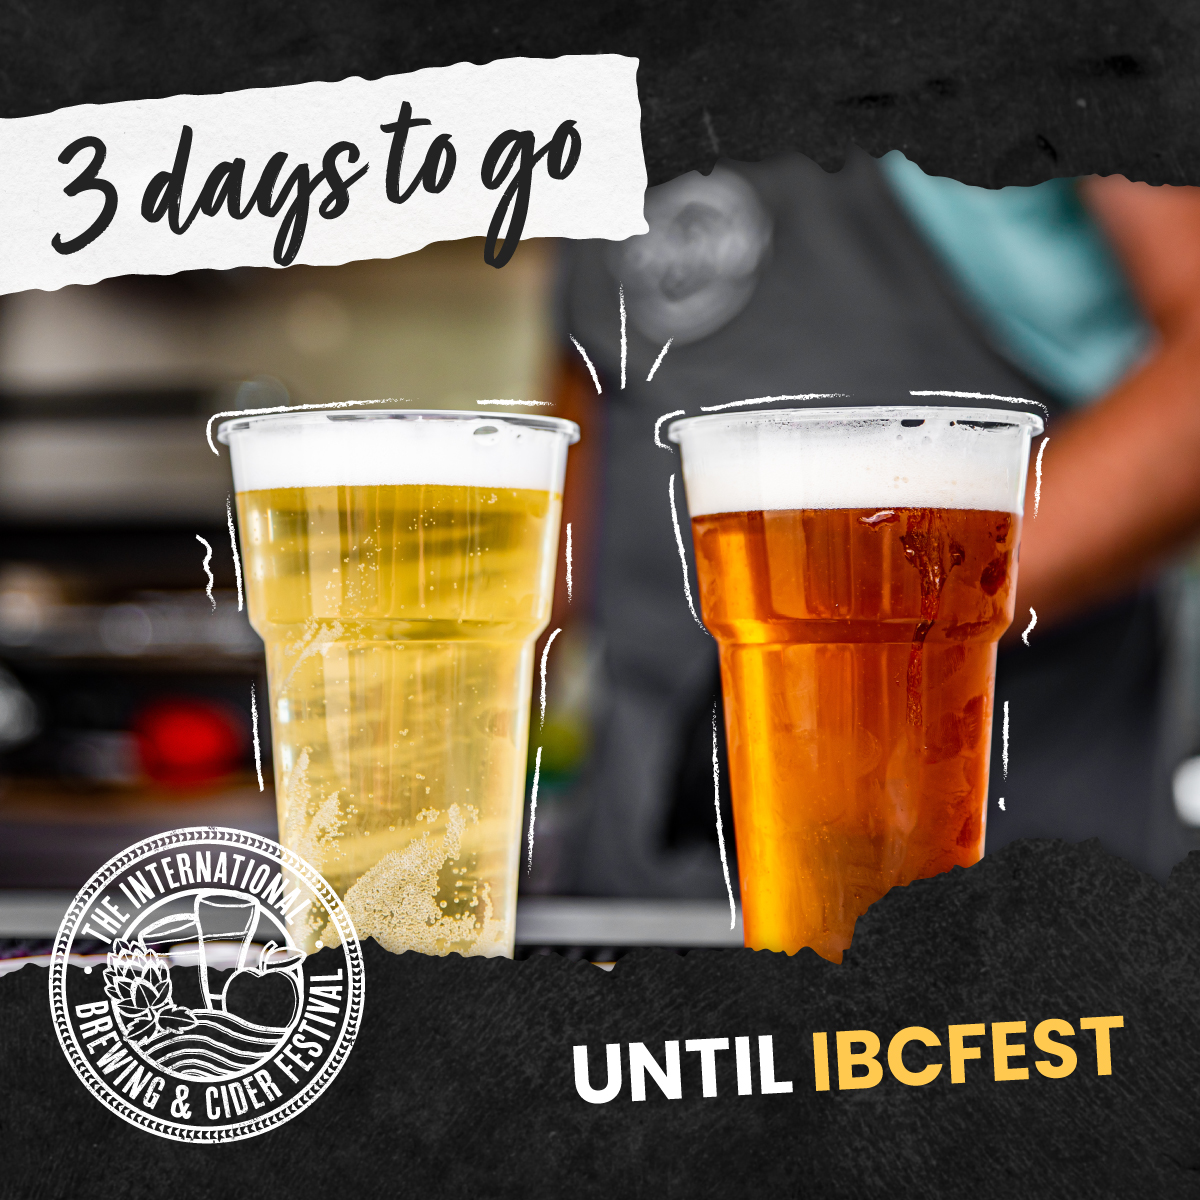 𝗧𝗛𝗥𝗘𝗘 𝗗𝗔𝗬𝗦 𝗧𝗢 𝗚𝗢 🗓️ The countdown is officially ON for the first-ever #IBCFest🍻 The judges have arrived & are evaluating all the #beers and #ciders entered into the @Brewingawards, which will be showcased this weekend 🍏🍺 Don’t miss out: ibcfest.com/tickets